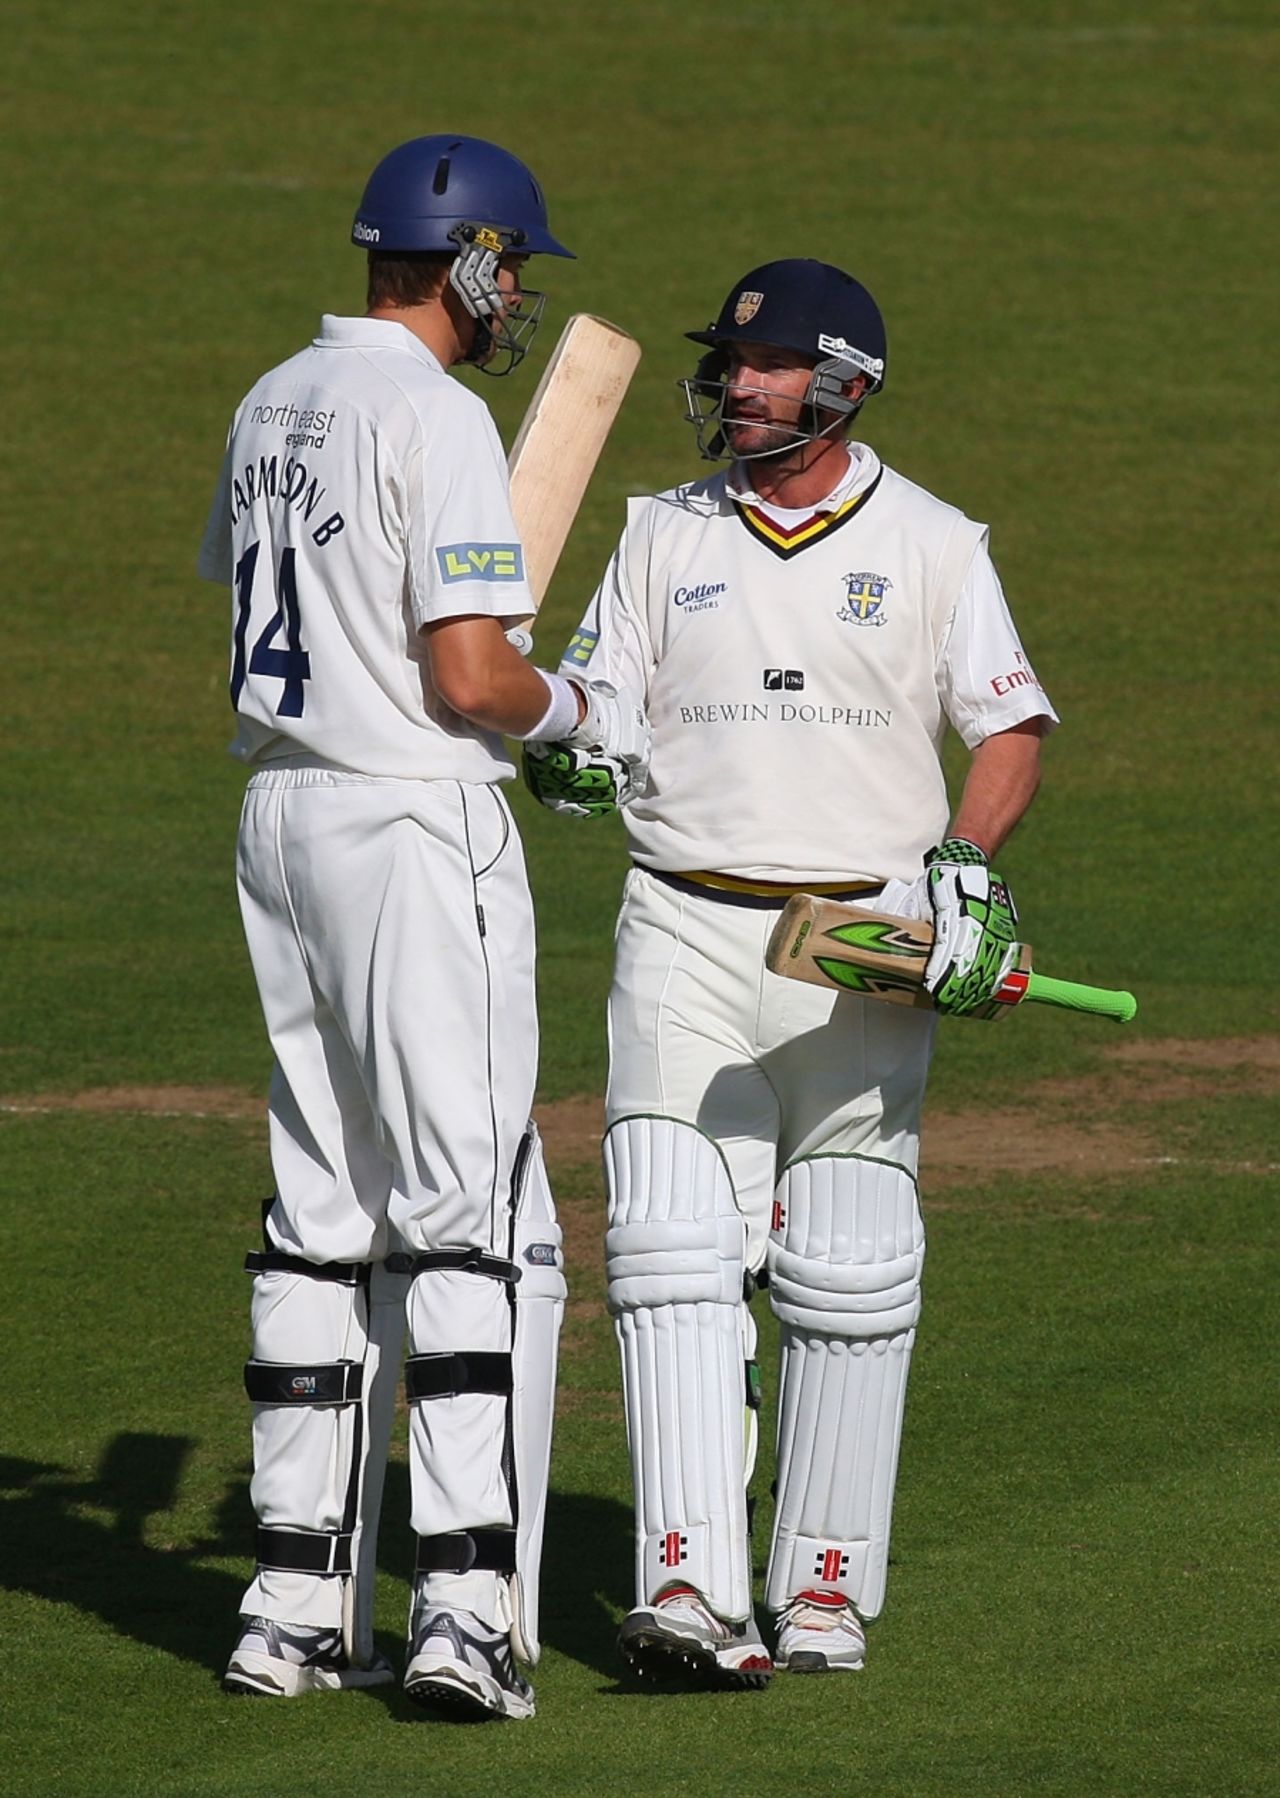 Michael Di Venuto and Ben Harmison put on 68 for the fourth wicket to frustrate Somerset, Durham v Somerset, County Championship Division One, Chester-le-Street, September 16 2010